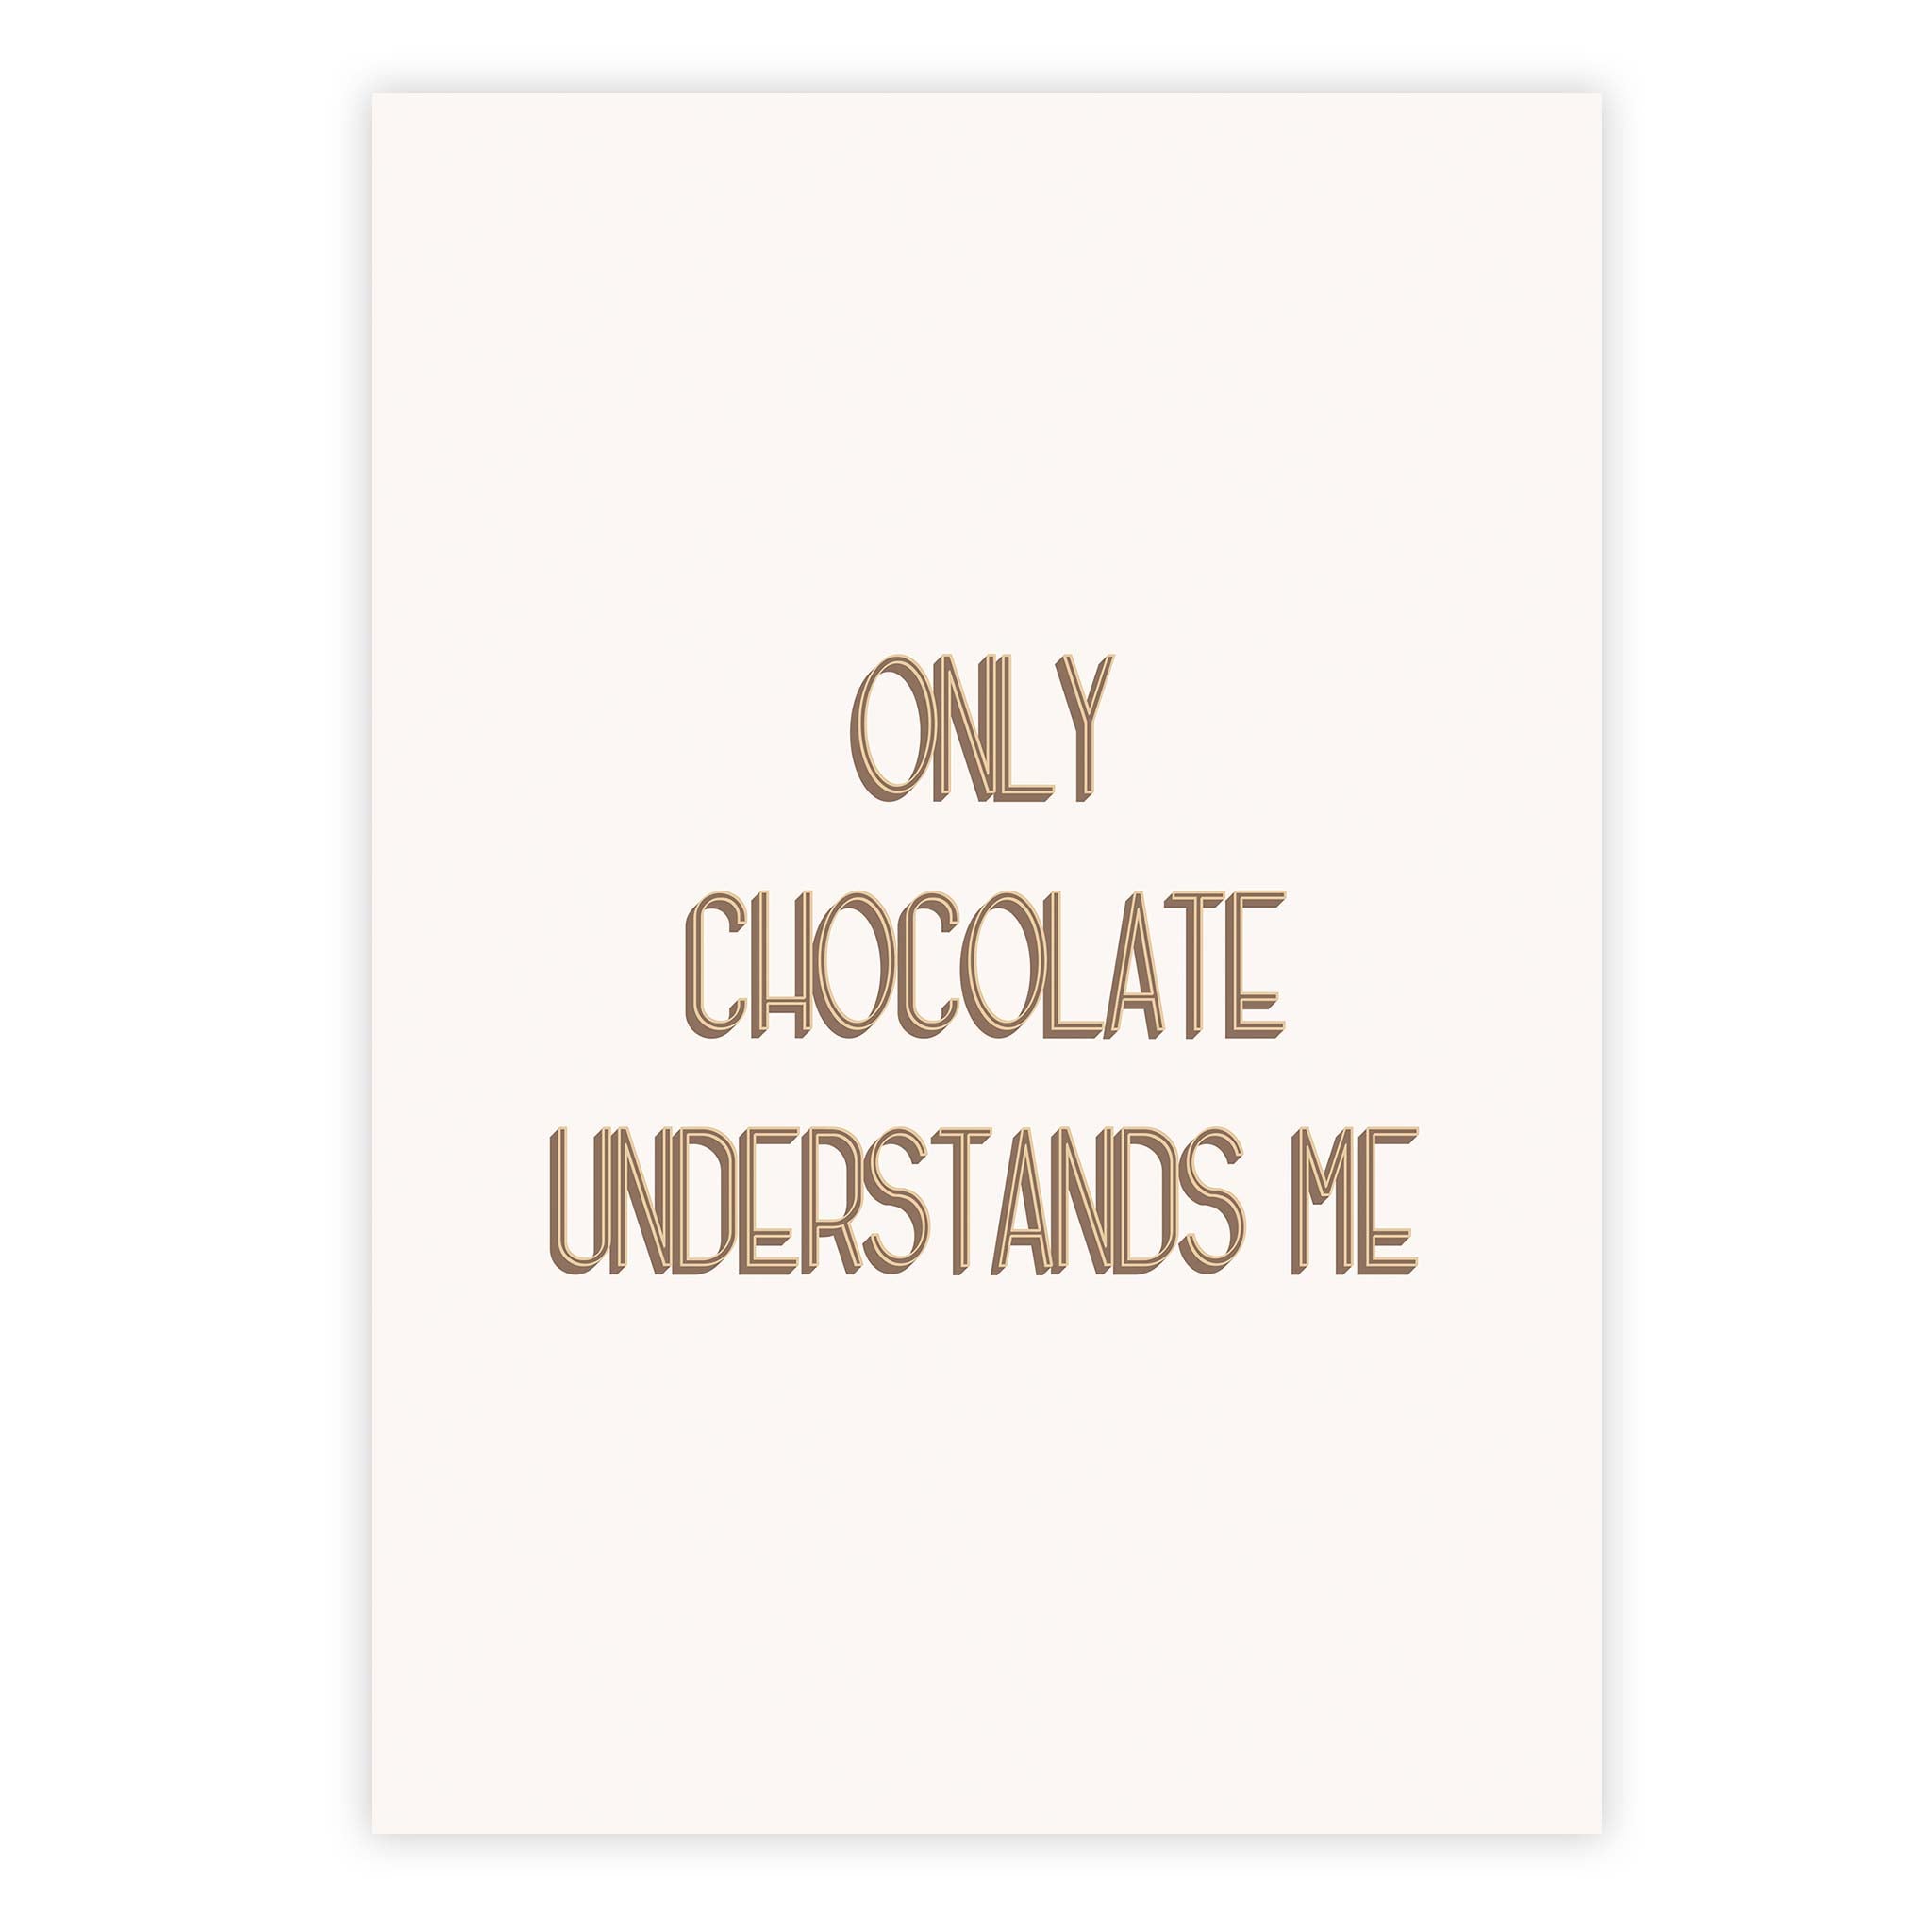 Only Chocolate understands me